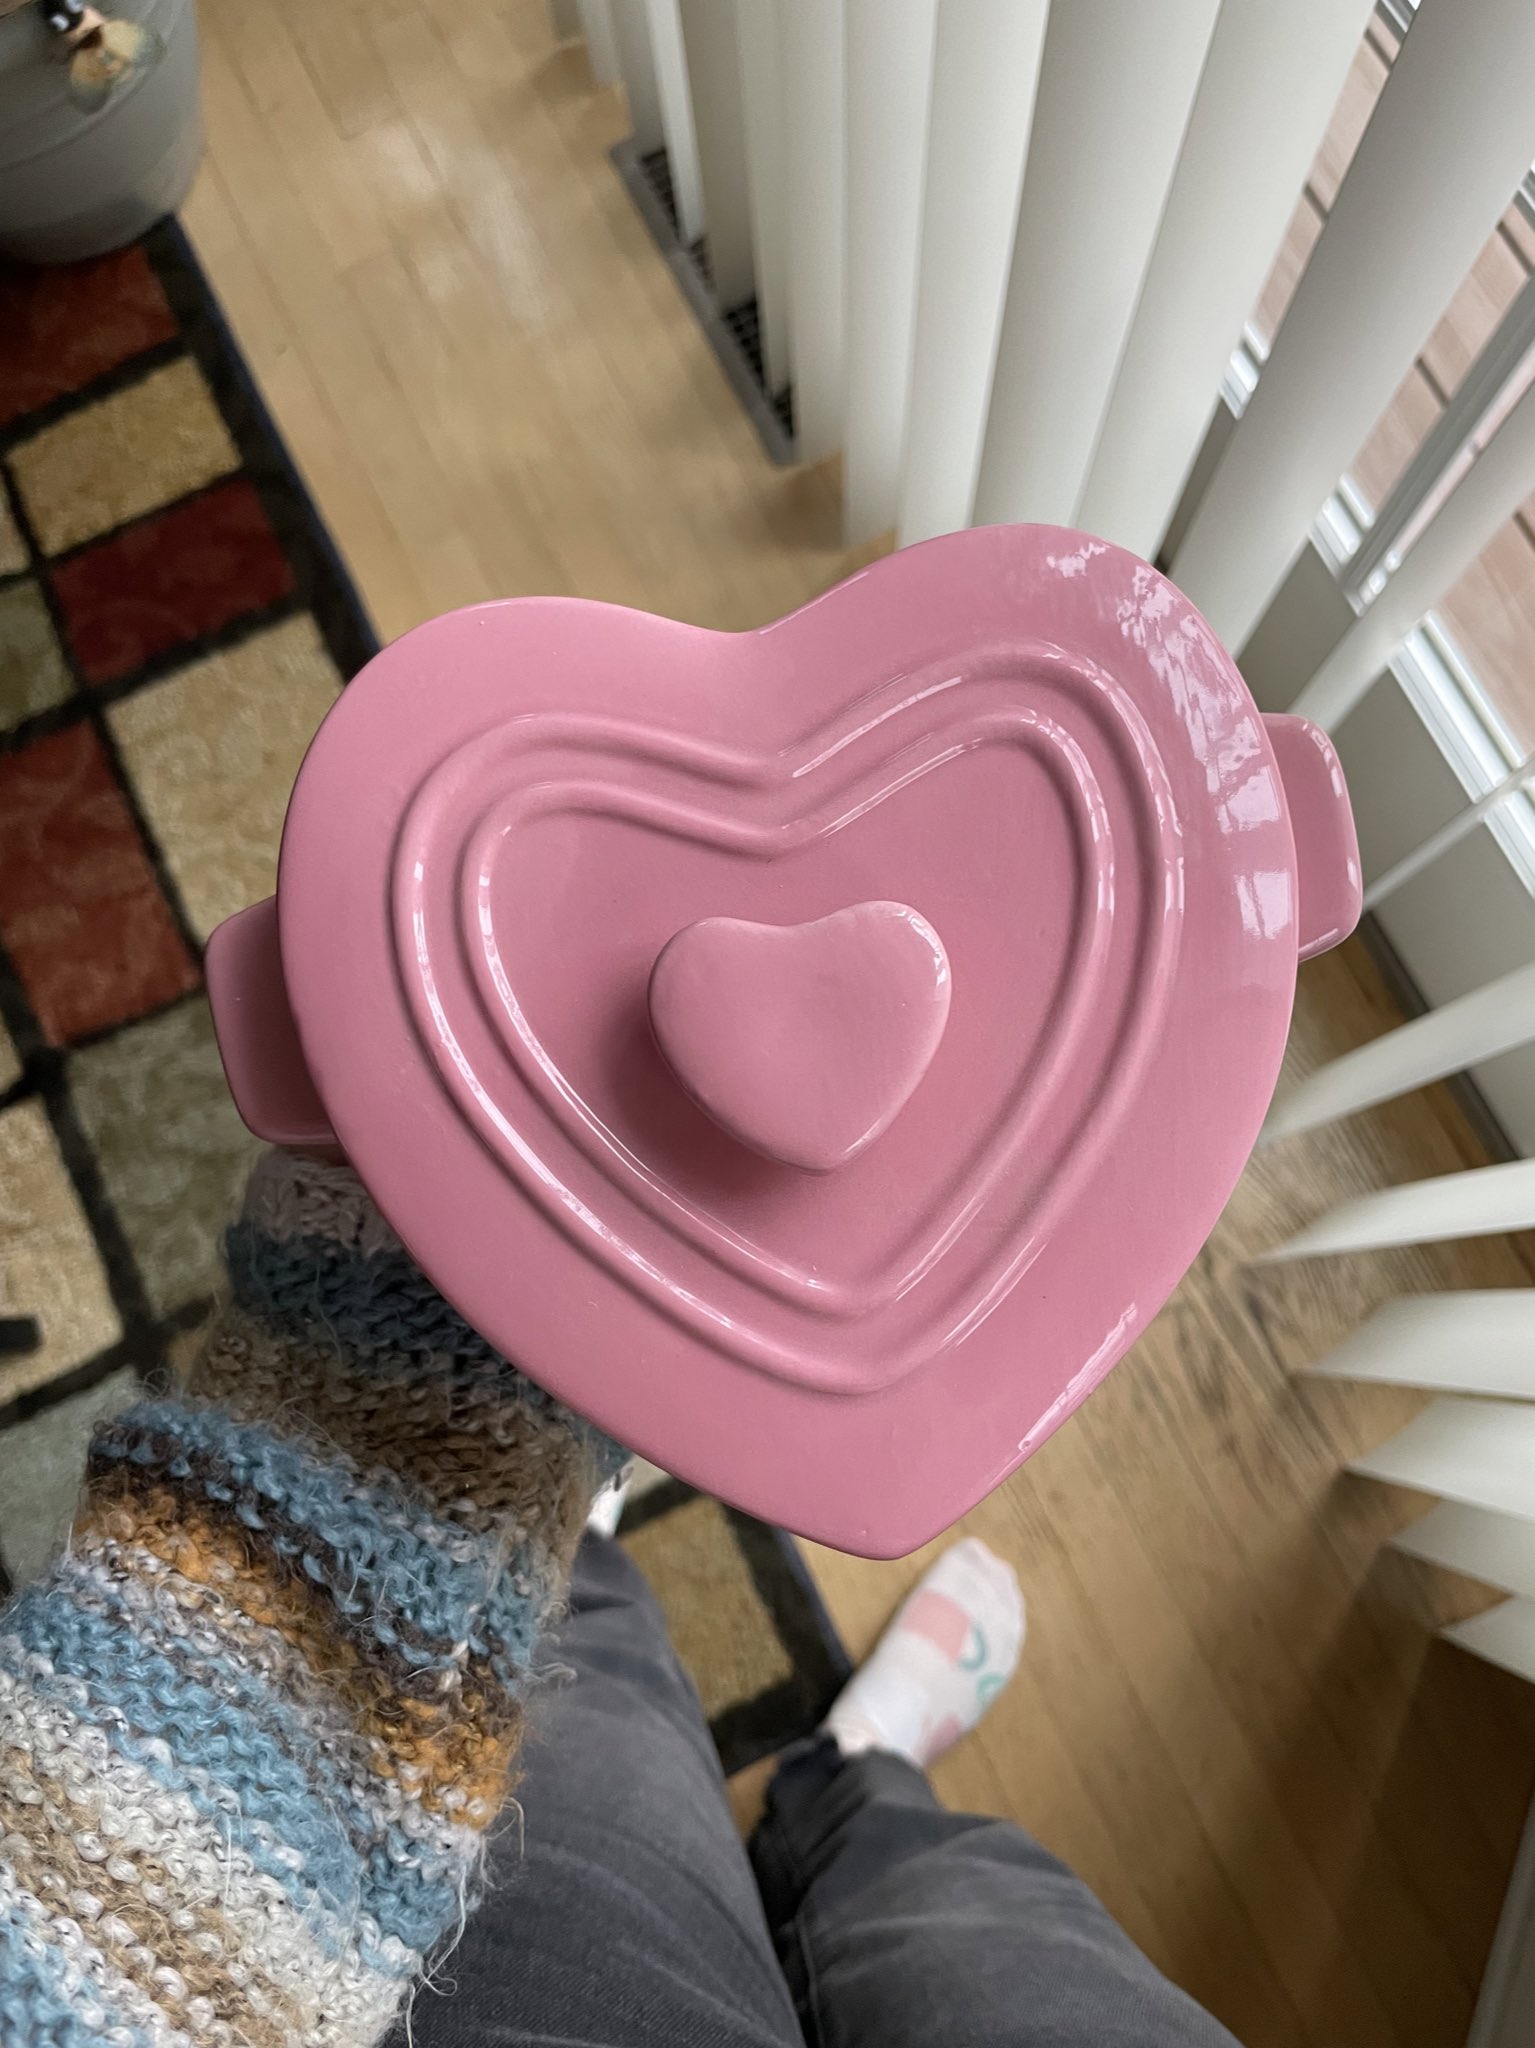 erin🤍 (iso indy n3) on X: 💗 i got the heart shaped dutch oven from  target 💗  / X